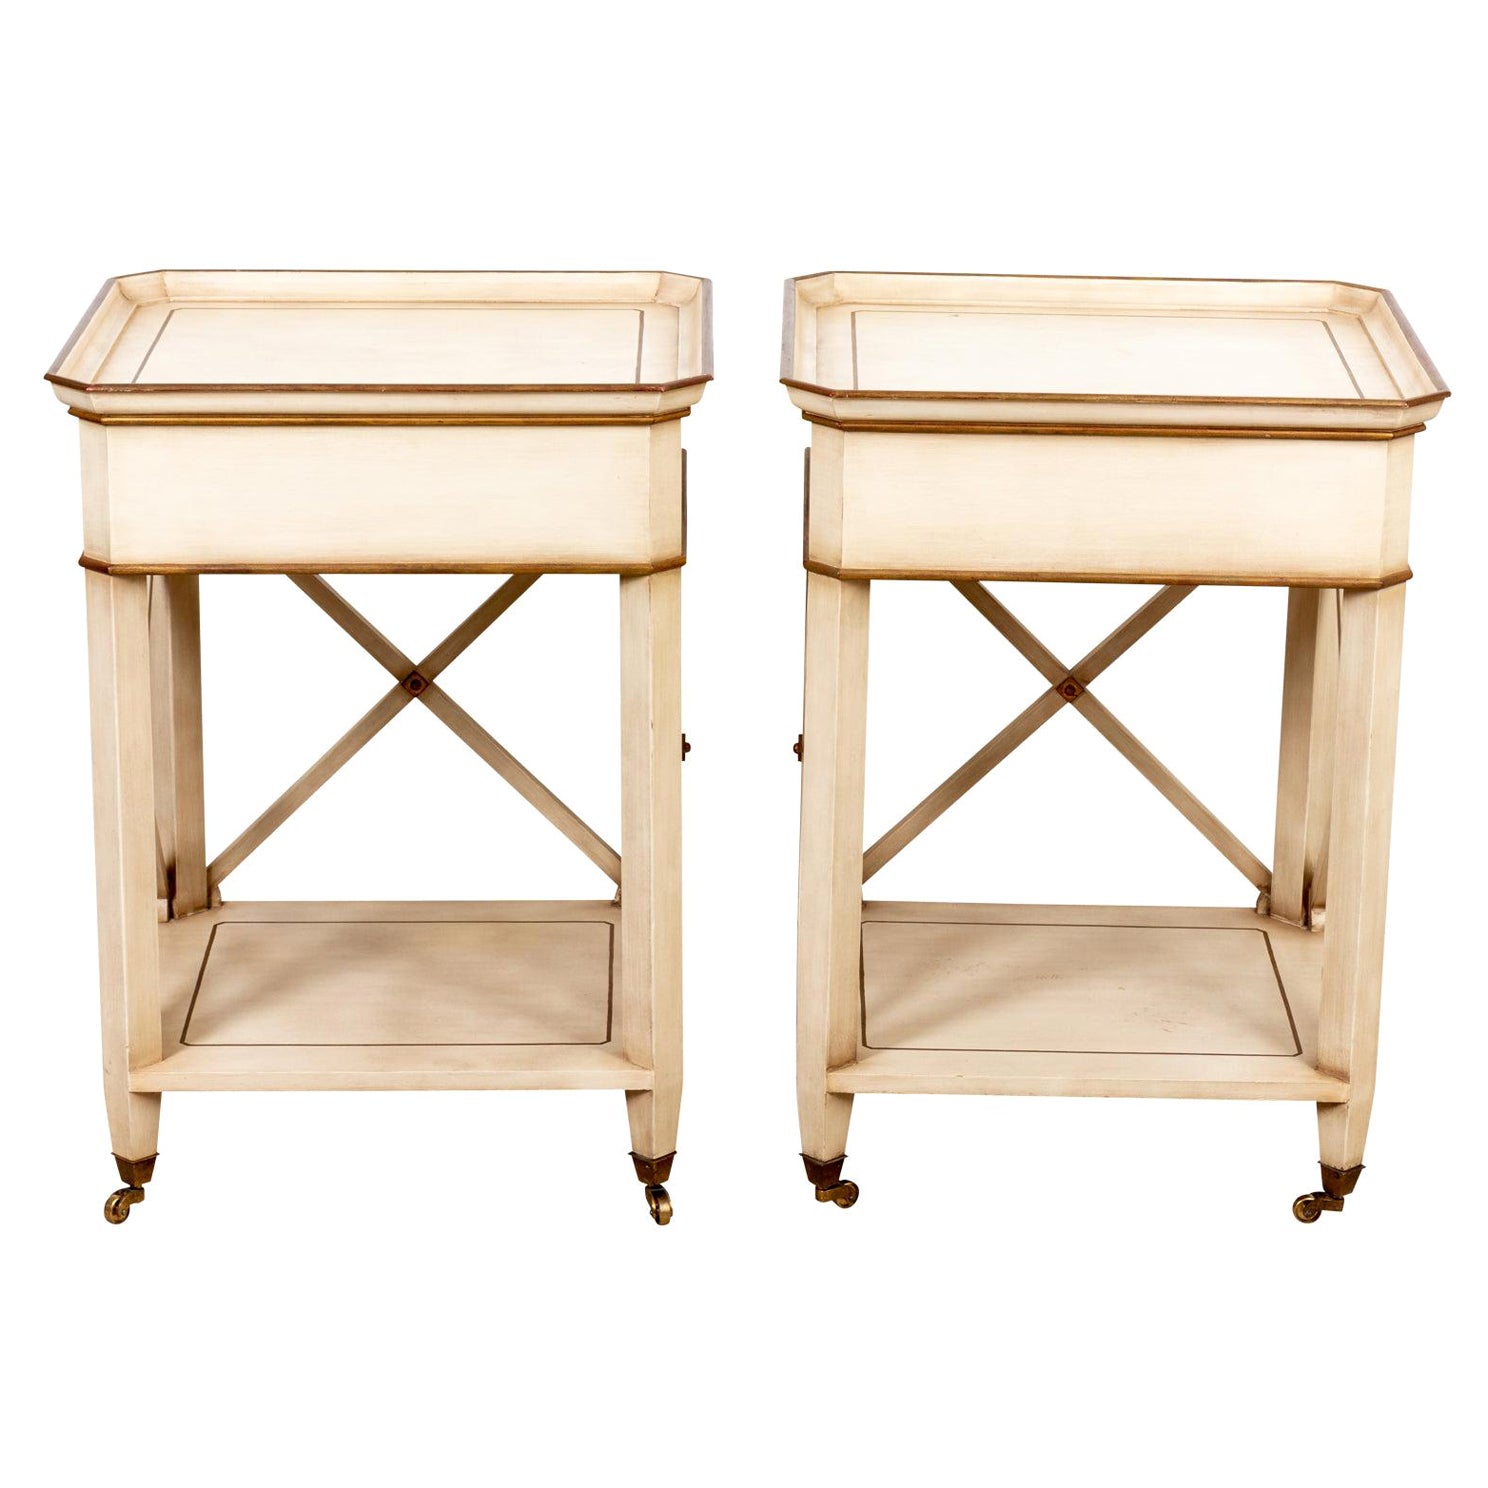 Pair of Side Tables on Casters